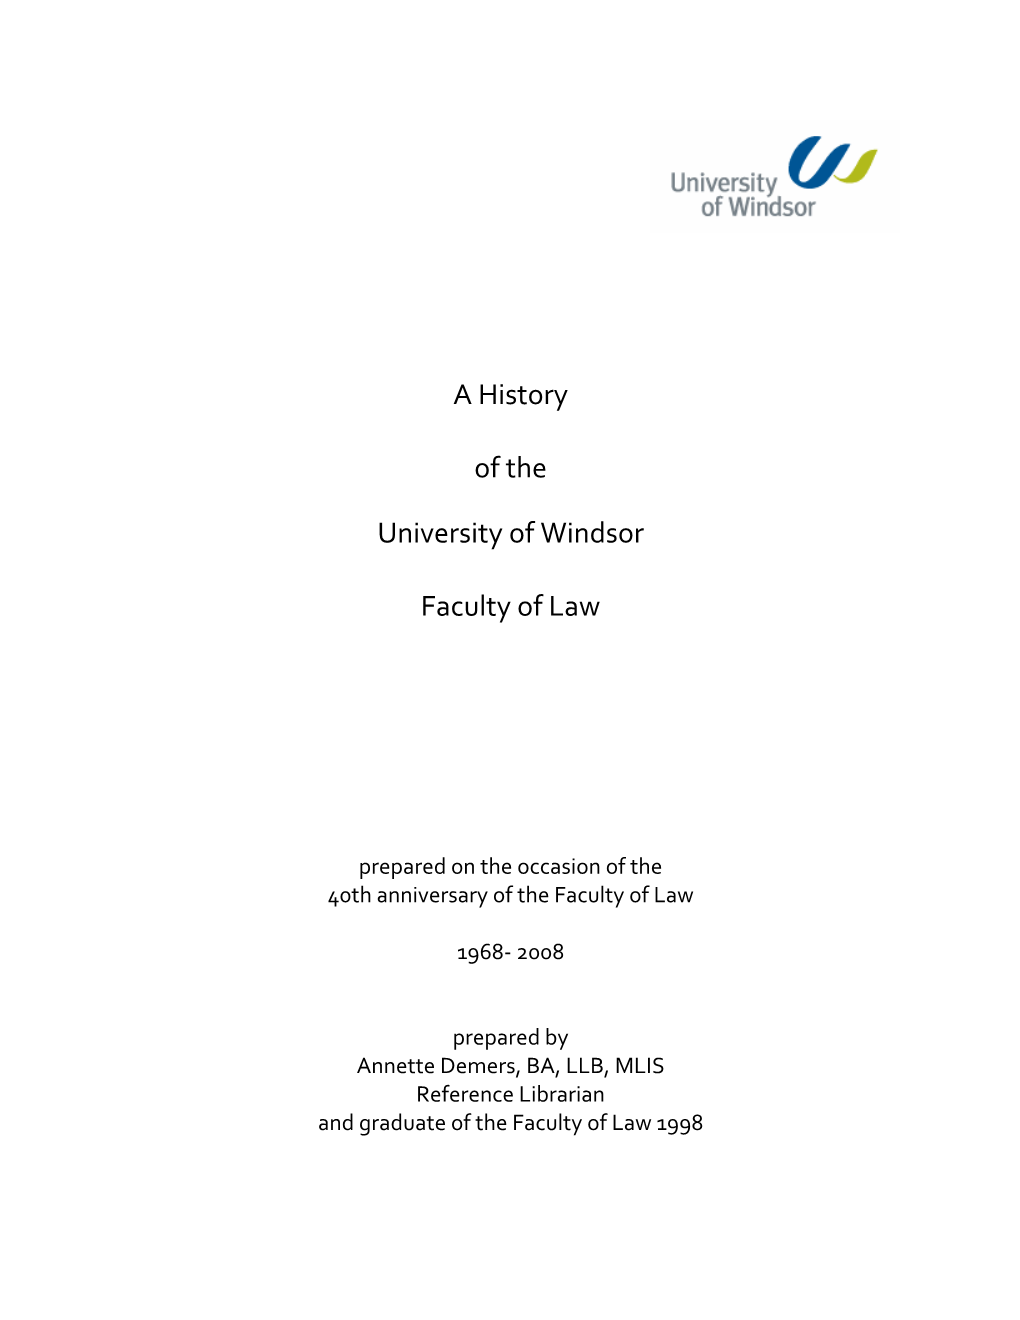 A History of the University of Windsor Faculty Of